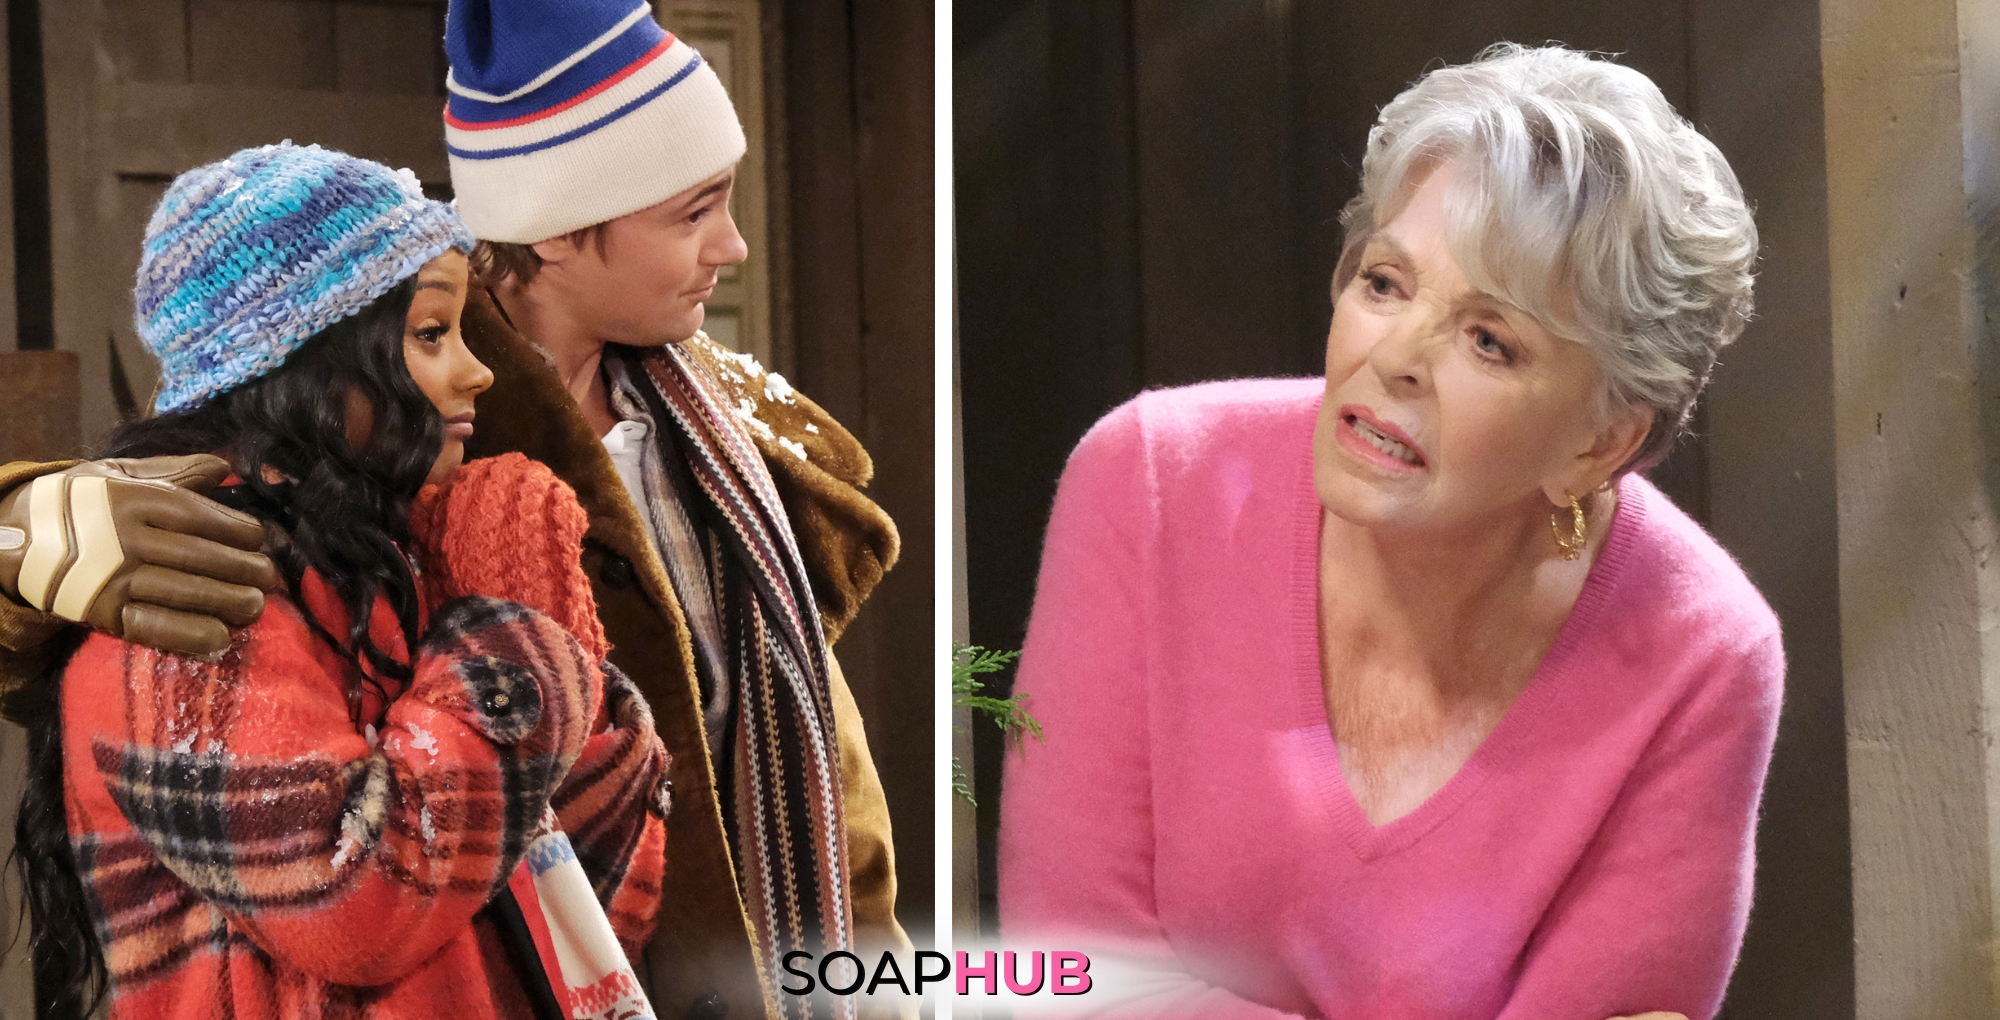 Days of our Lives spoilers for Monday, April 15 feature Chanel, Johnny, and July with the Soap Hub logo across the bottom.